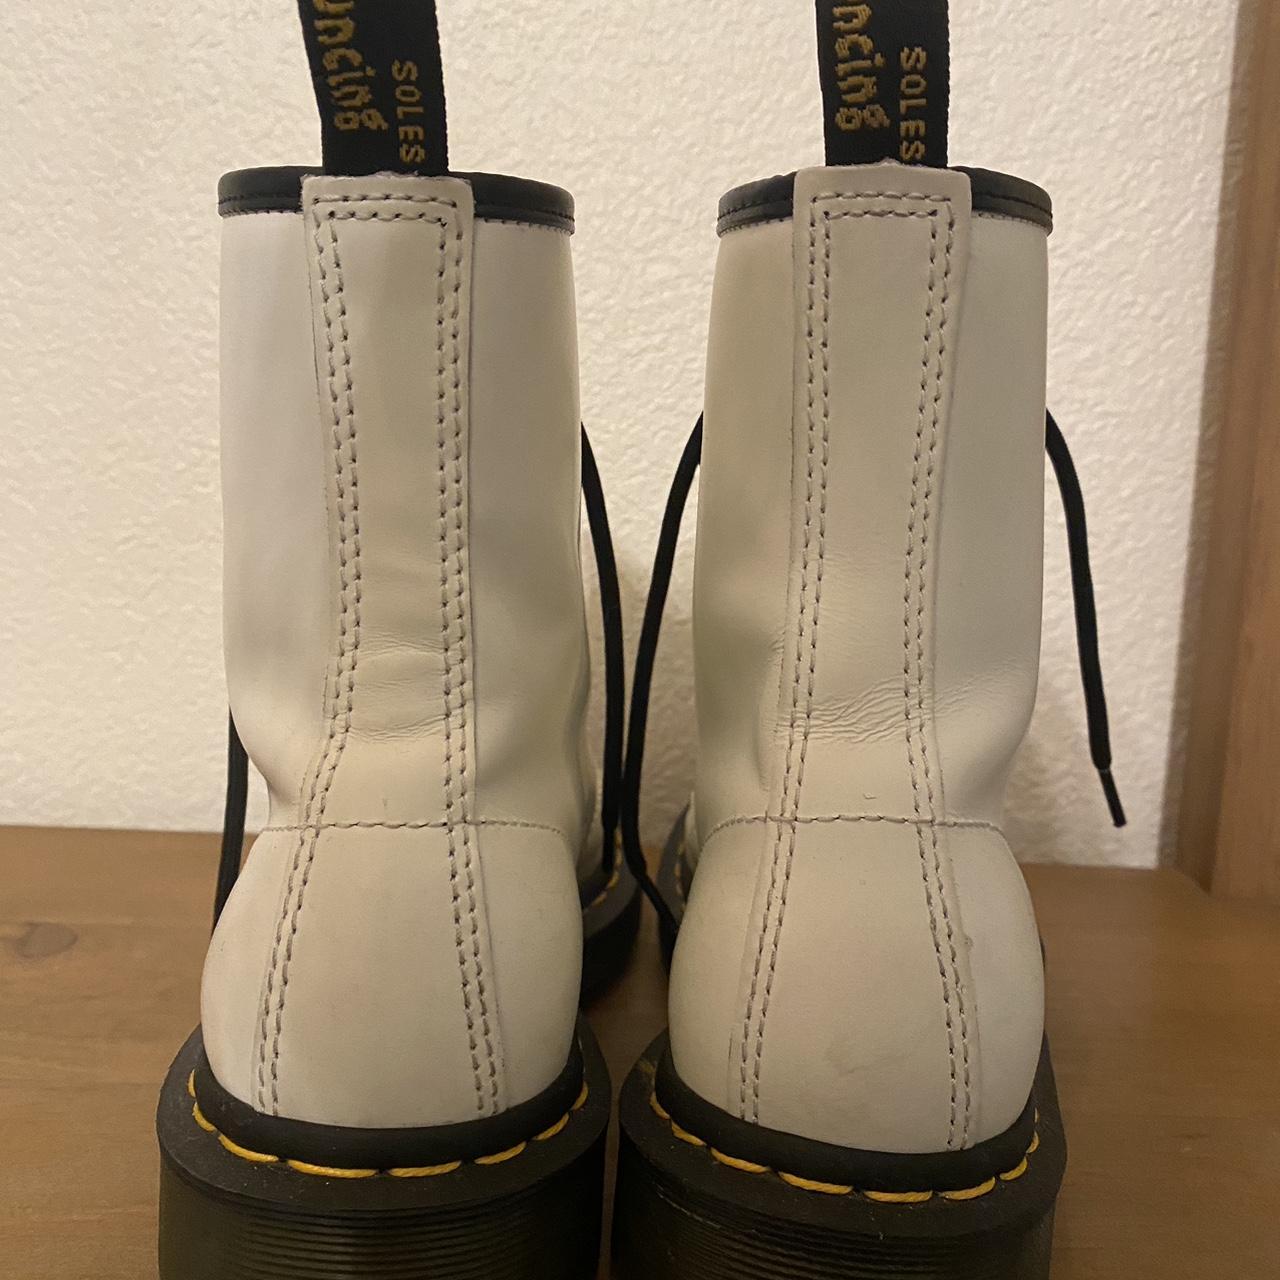 Dr. Martens Women's White and Yellow Boots (3)